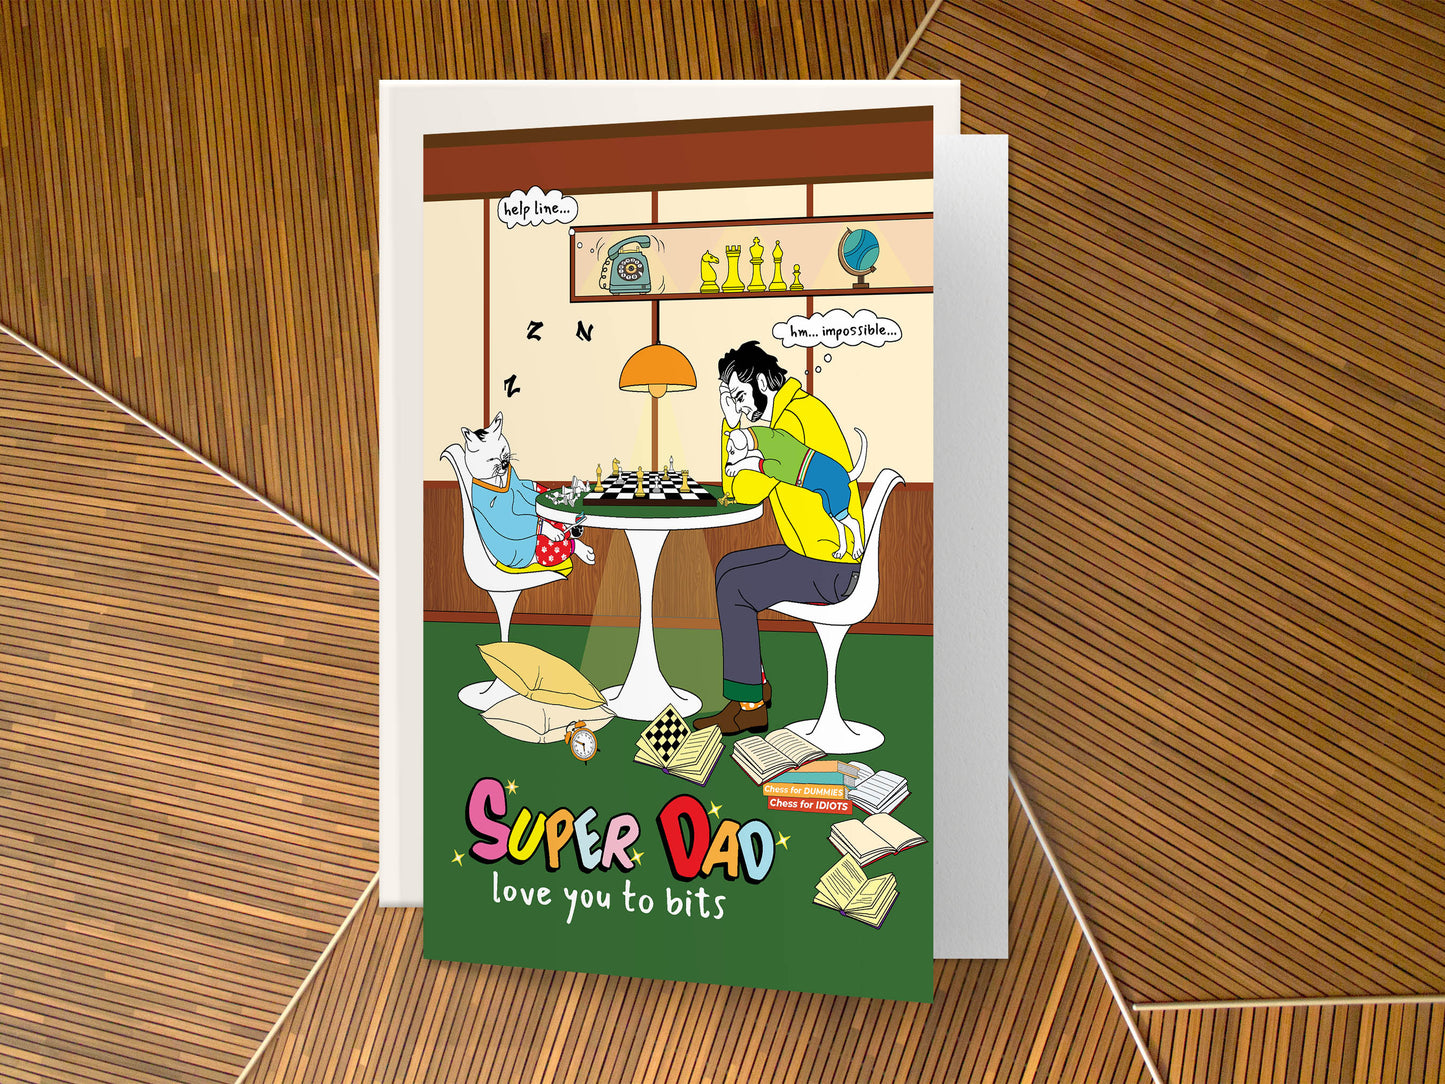 Fathers - Super Dad!